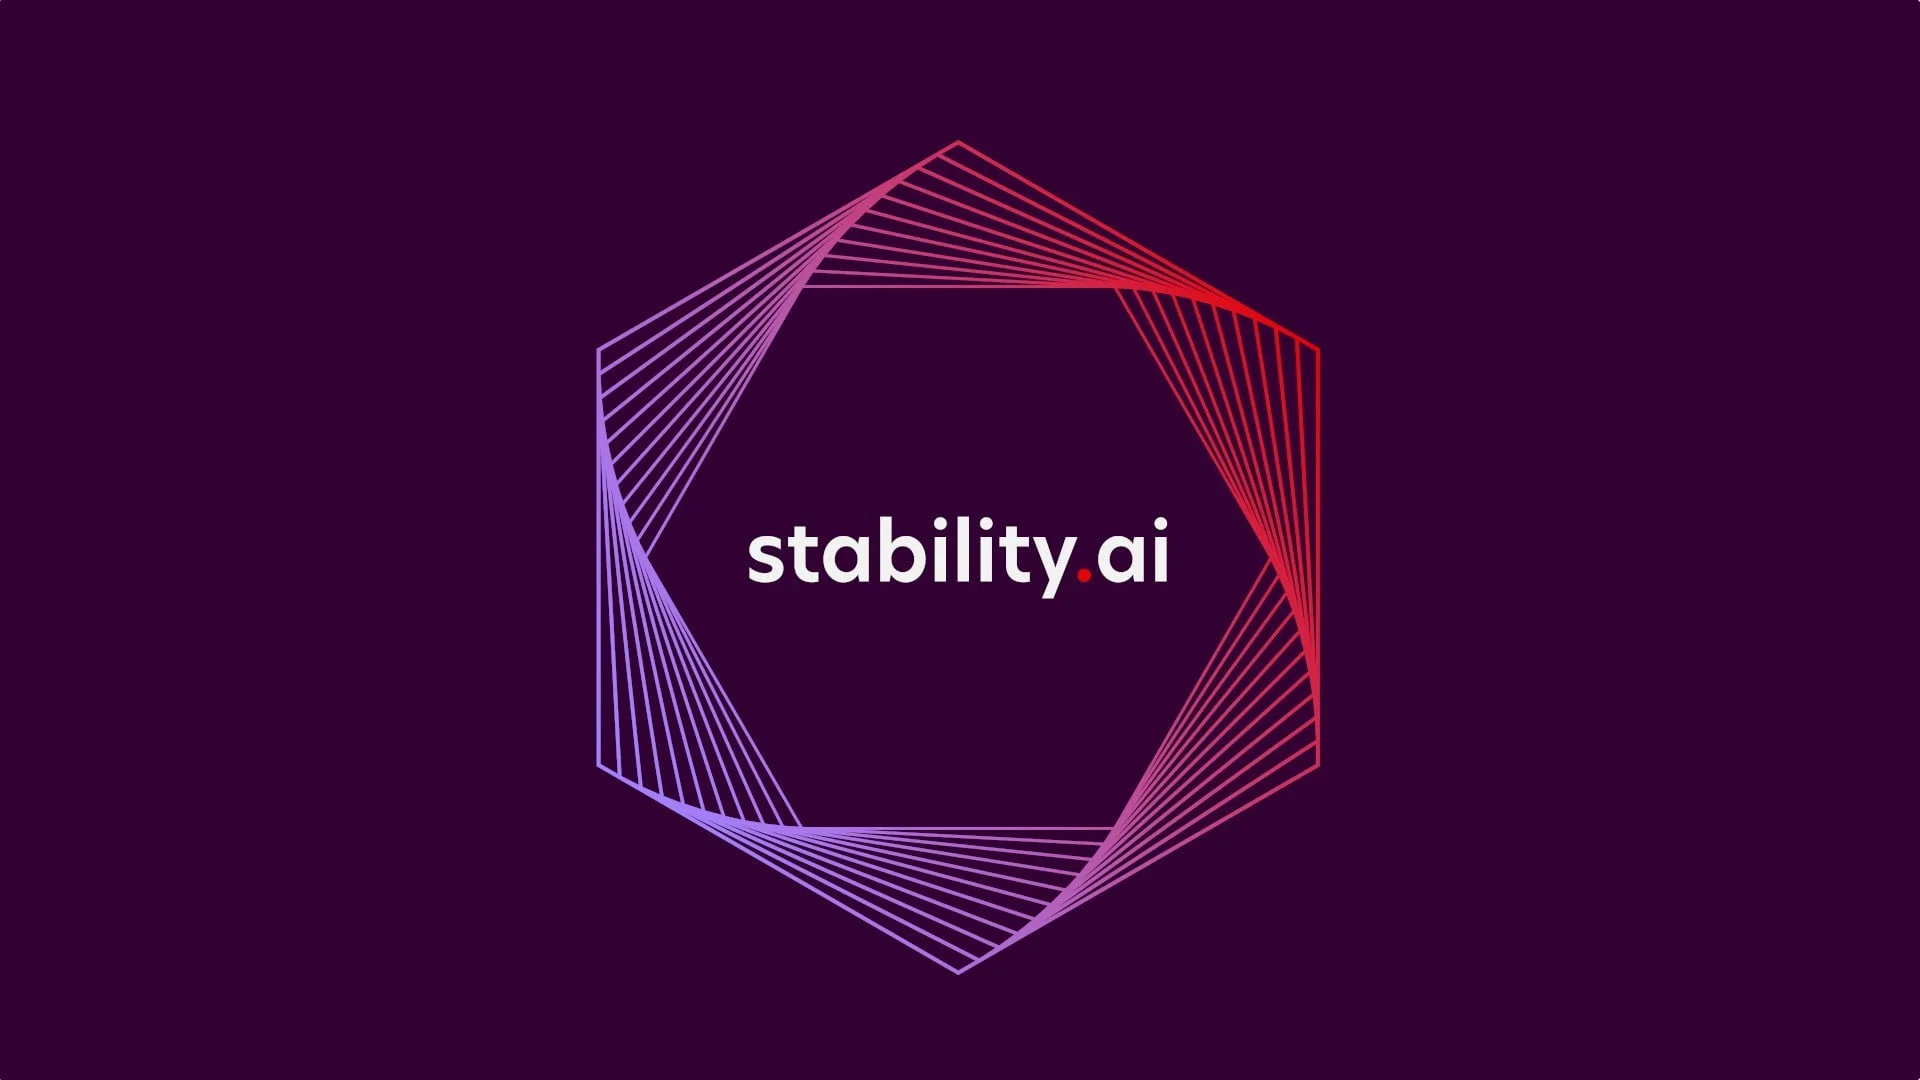 Stable Diffusion API now available, Stability AI partners with AWS